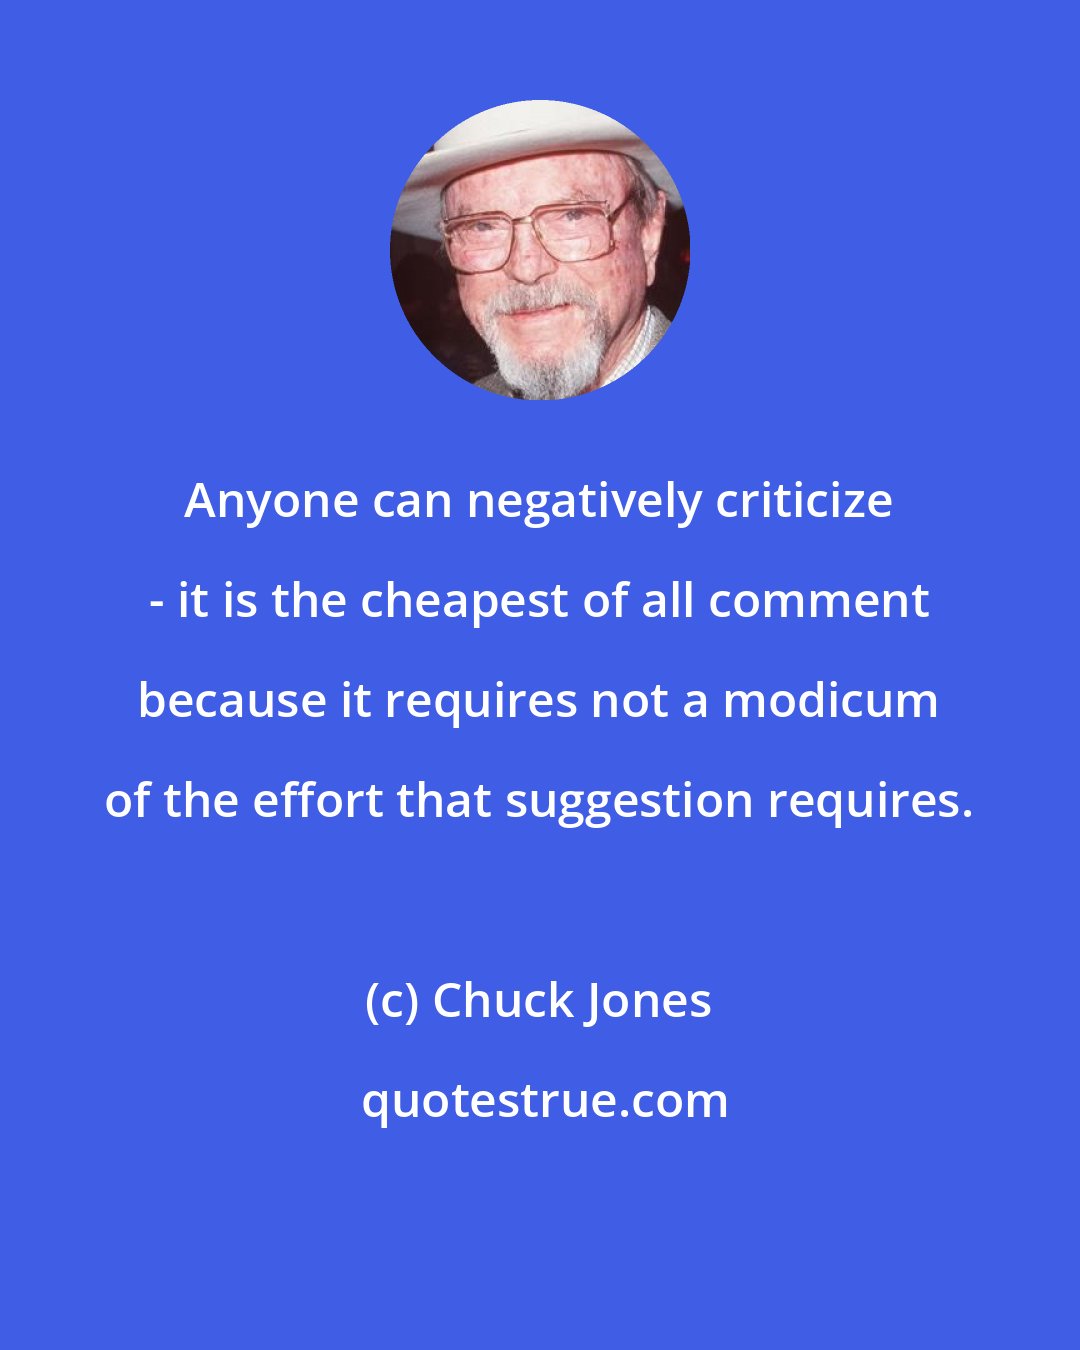 Chuck Jones: Anyone can negatively criticize - it is the cheapest of all comment because it requires not a modicum of the effort that suggestion requires.